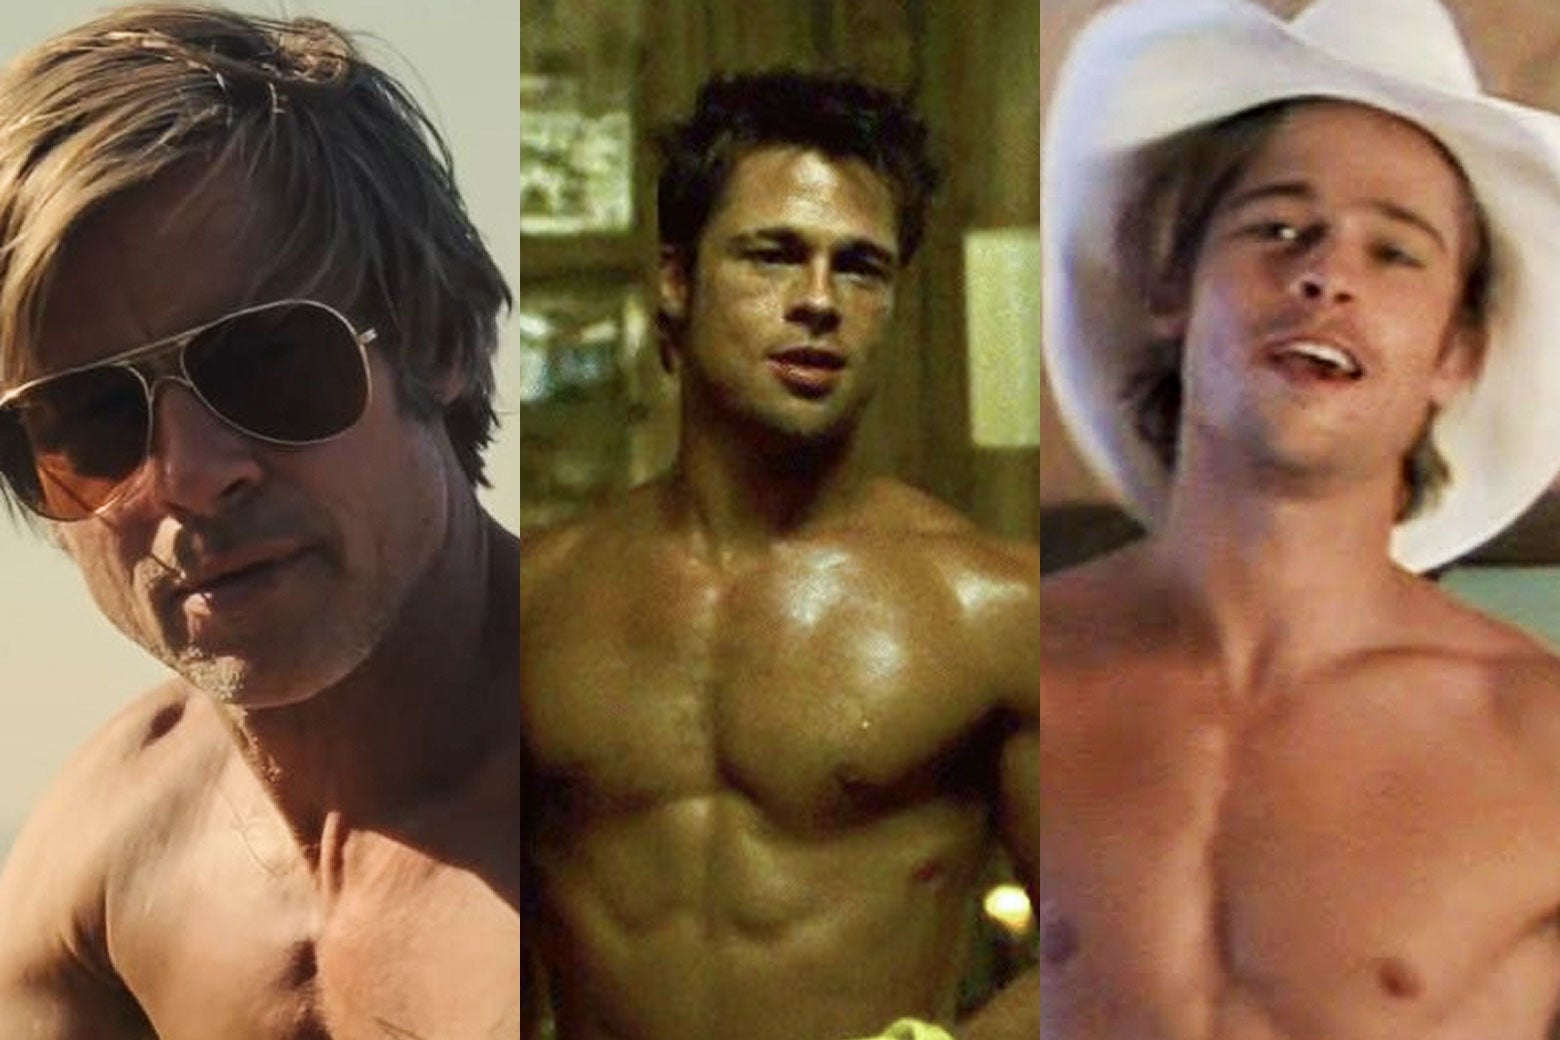 Triptych of Brad Pitt shirtless in Once Upon a Time in Hollywood, Fight Club, and Thelma and Louise.